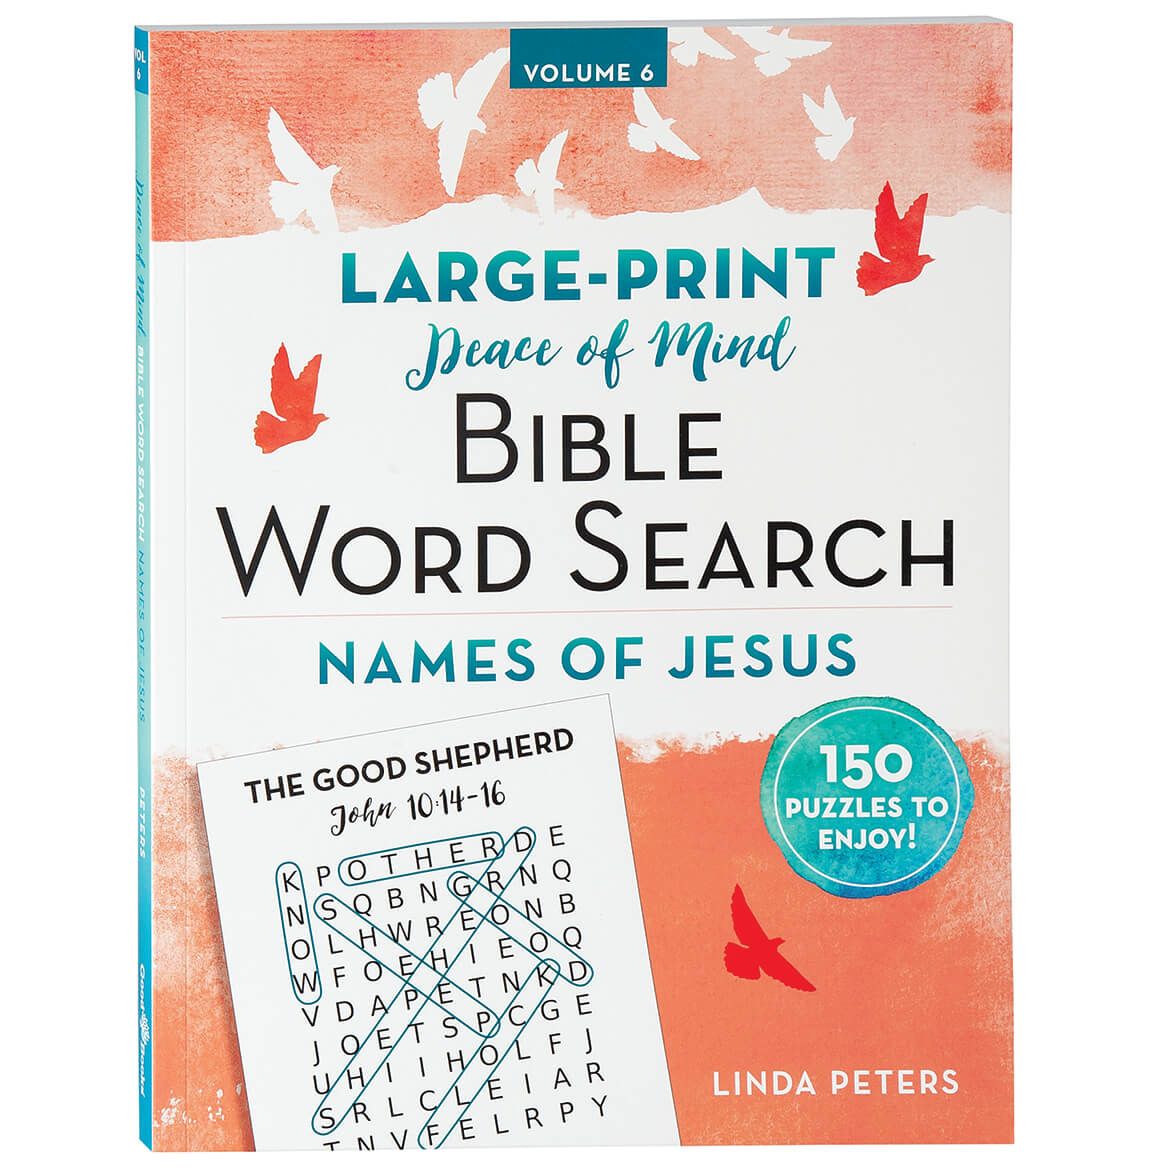 Peace of Mind Bible Word Search Names of Jesus + '-' + 374697